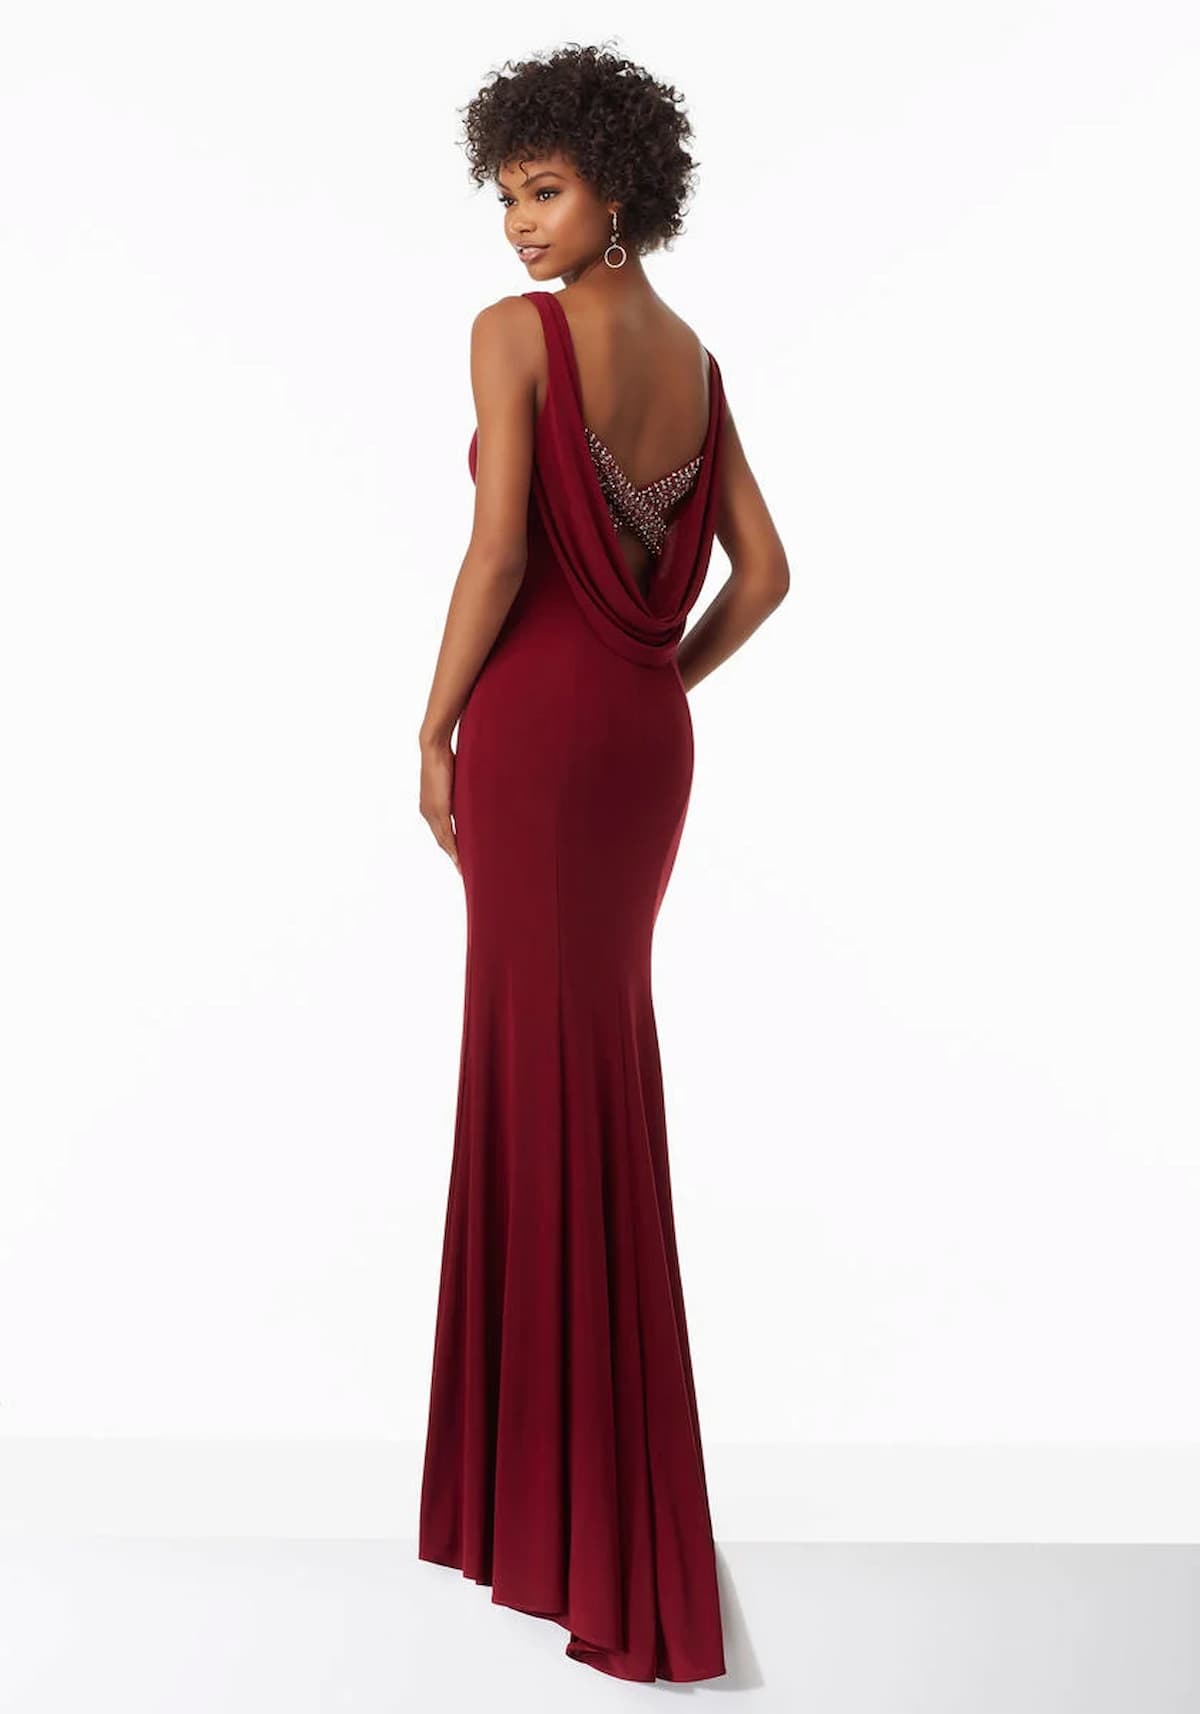 Back view of Morilee 99053 Prom Dress in colour bordeaux.